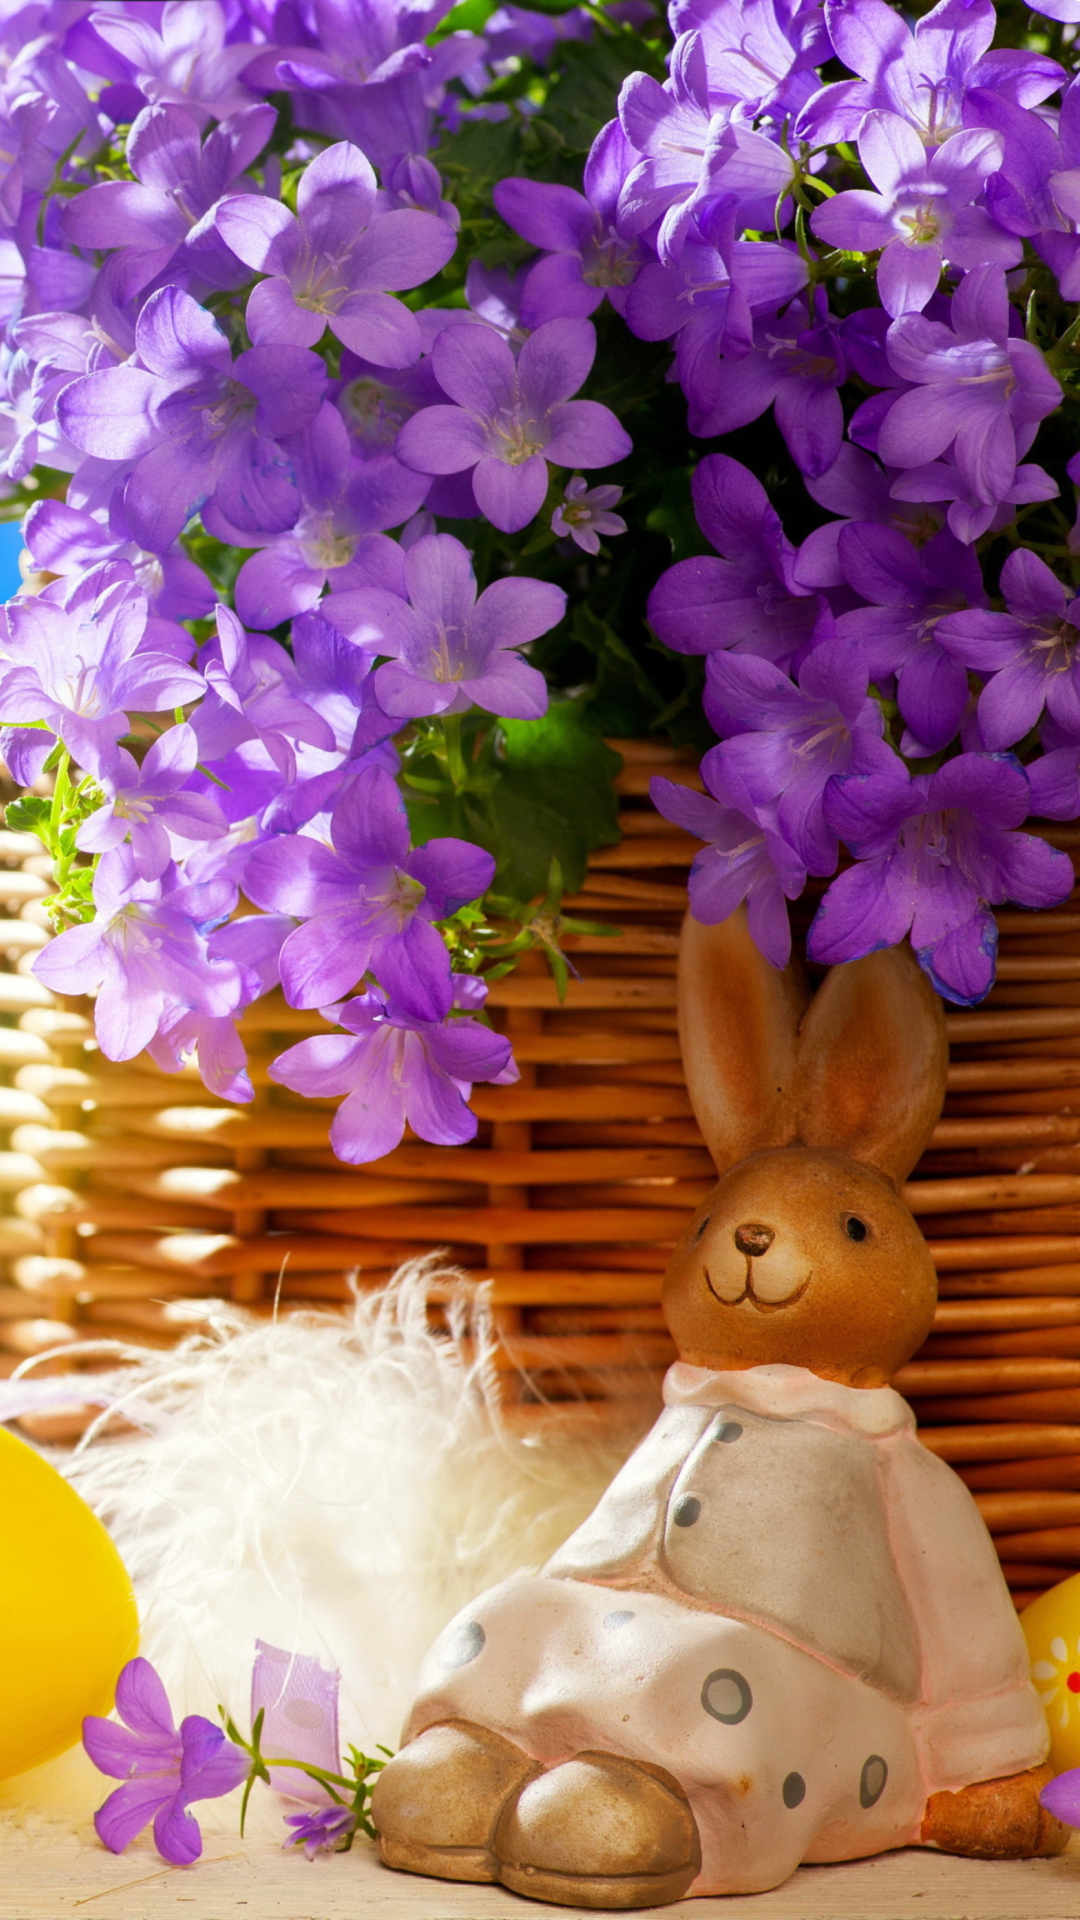 Easter Rabbit And Purple Flowers wallpaper 1080x1920